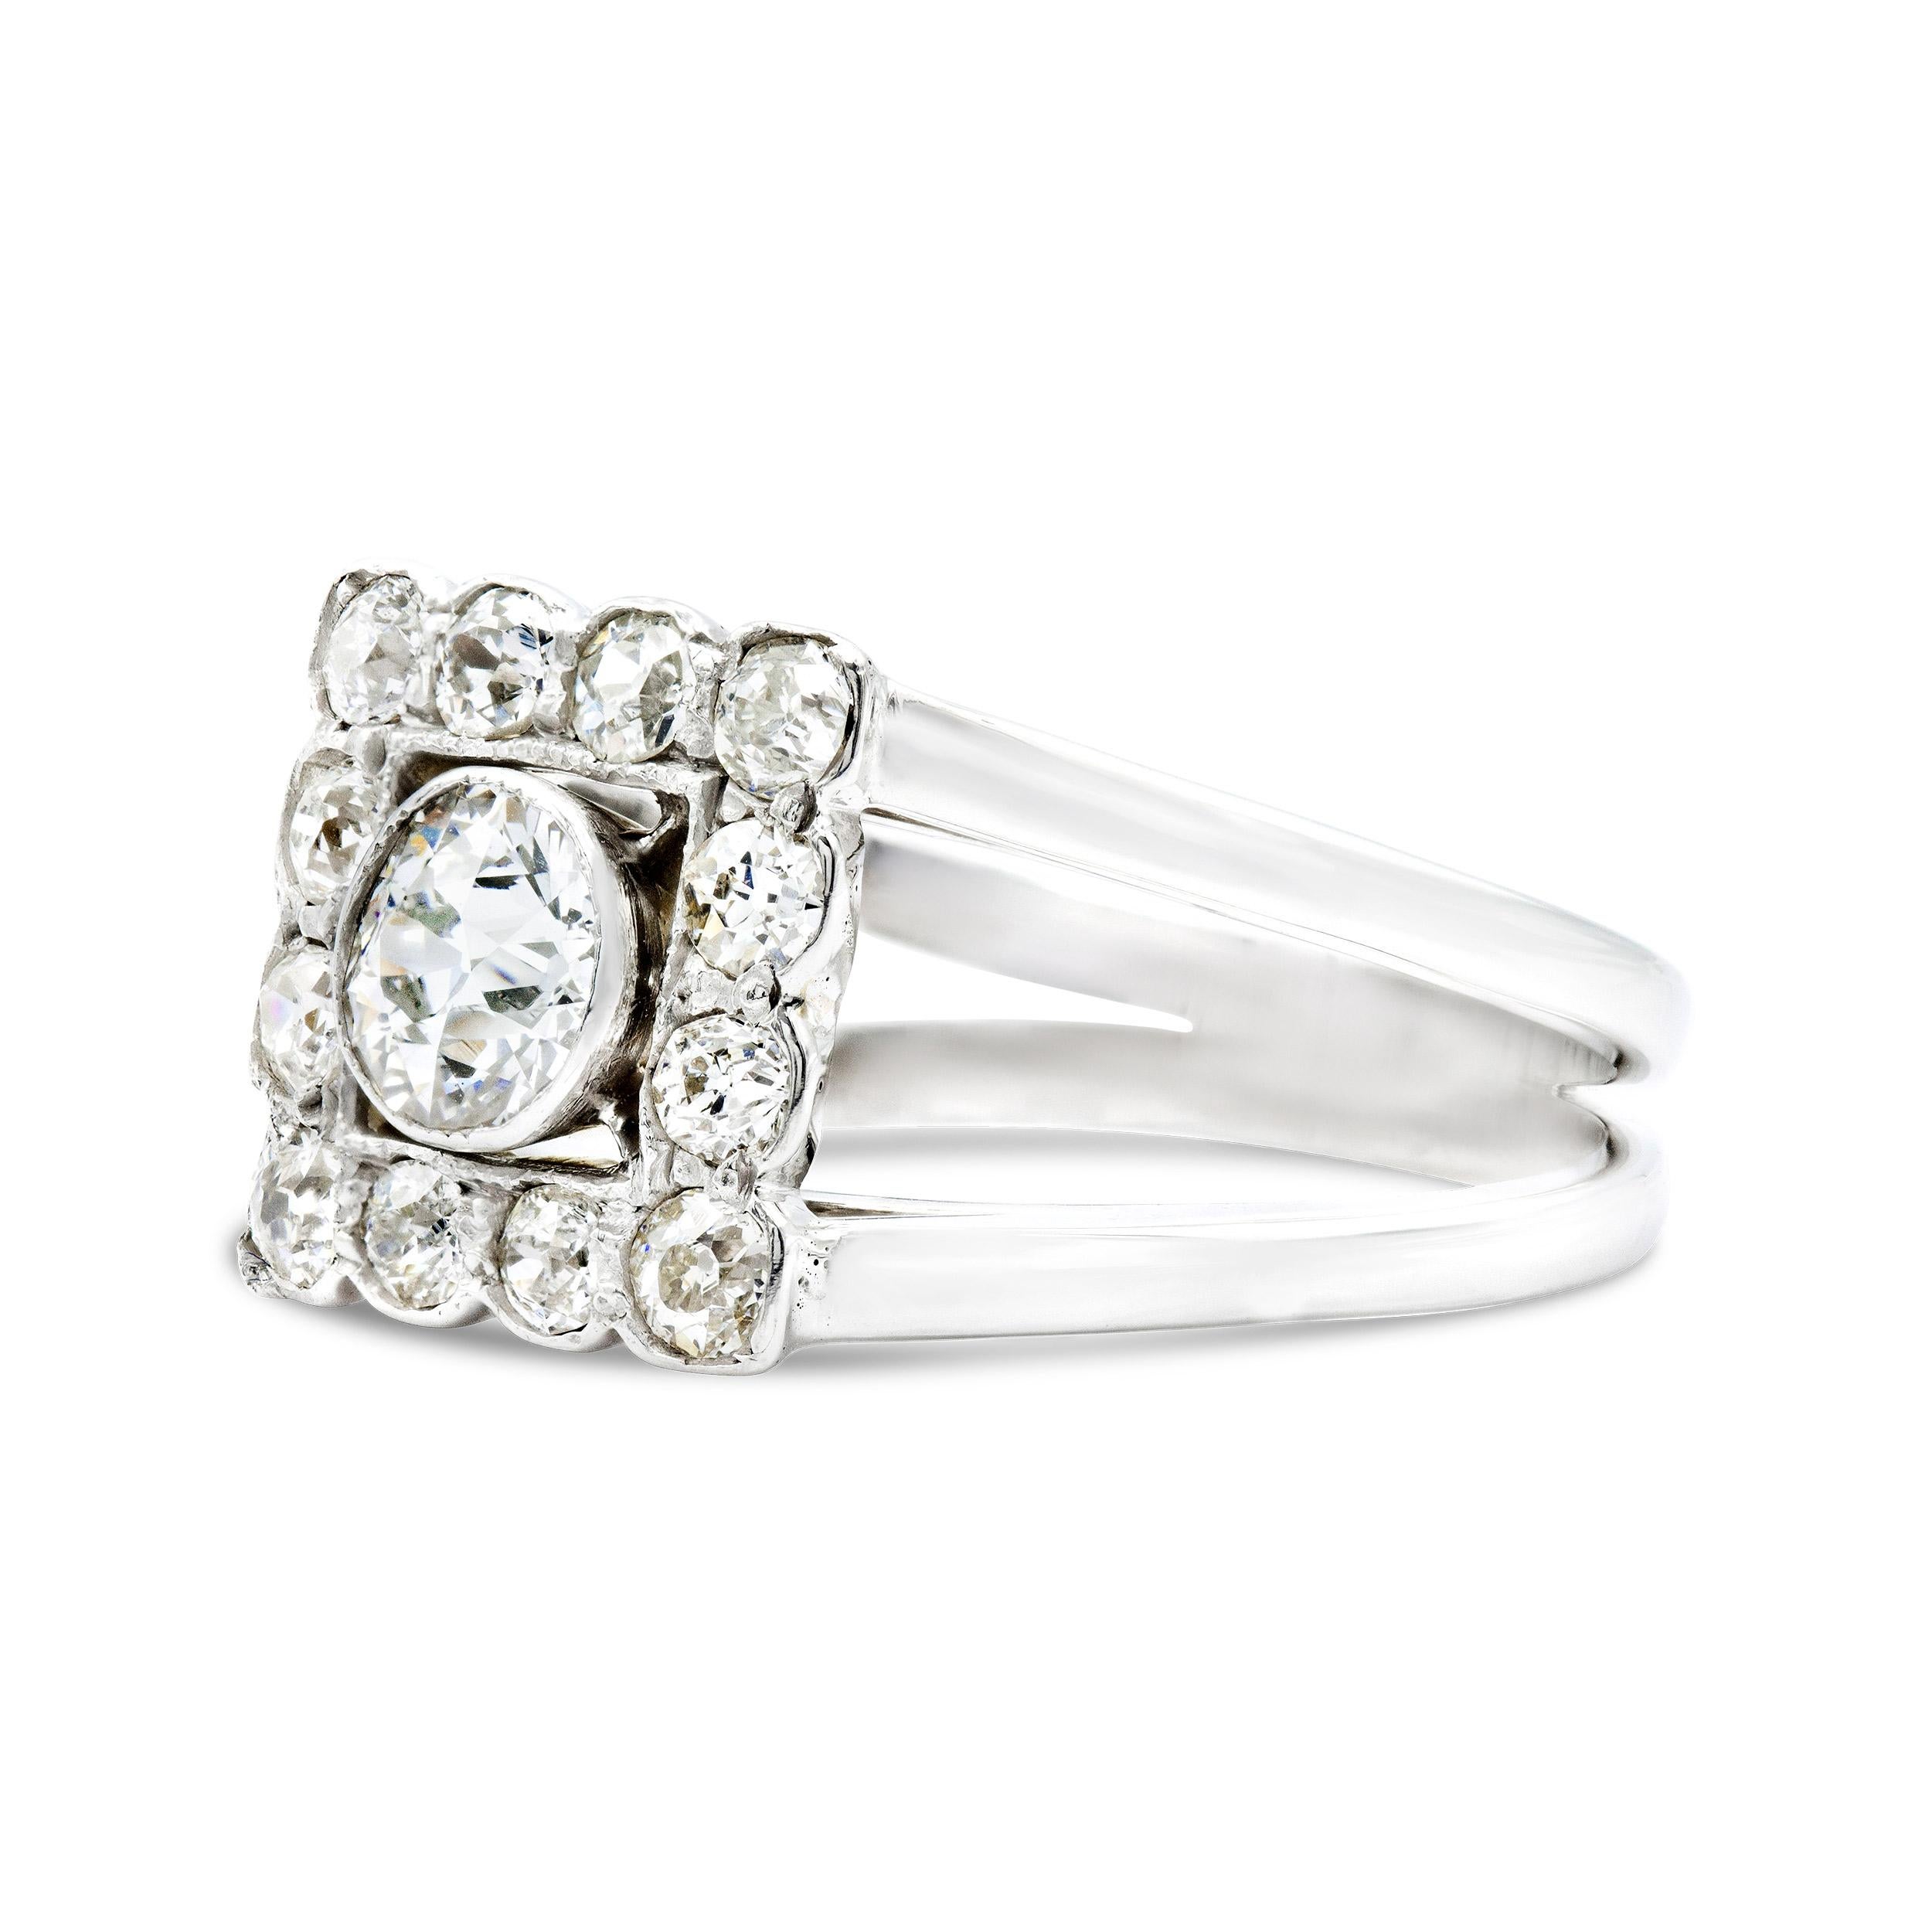 Shining from the center of this Art Deco diamond ring is a bezel-set old European cut diamond, irresistibly bright and full of life. Its sparkle is enhanced by a frame of smaller old Euros, bringing the total weight of this piece to just under 1.50